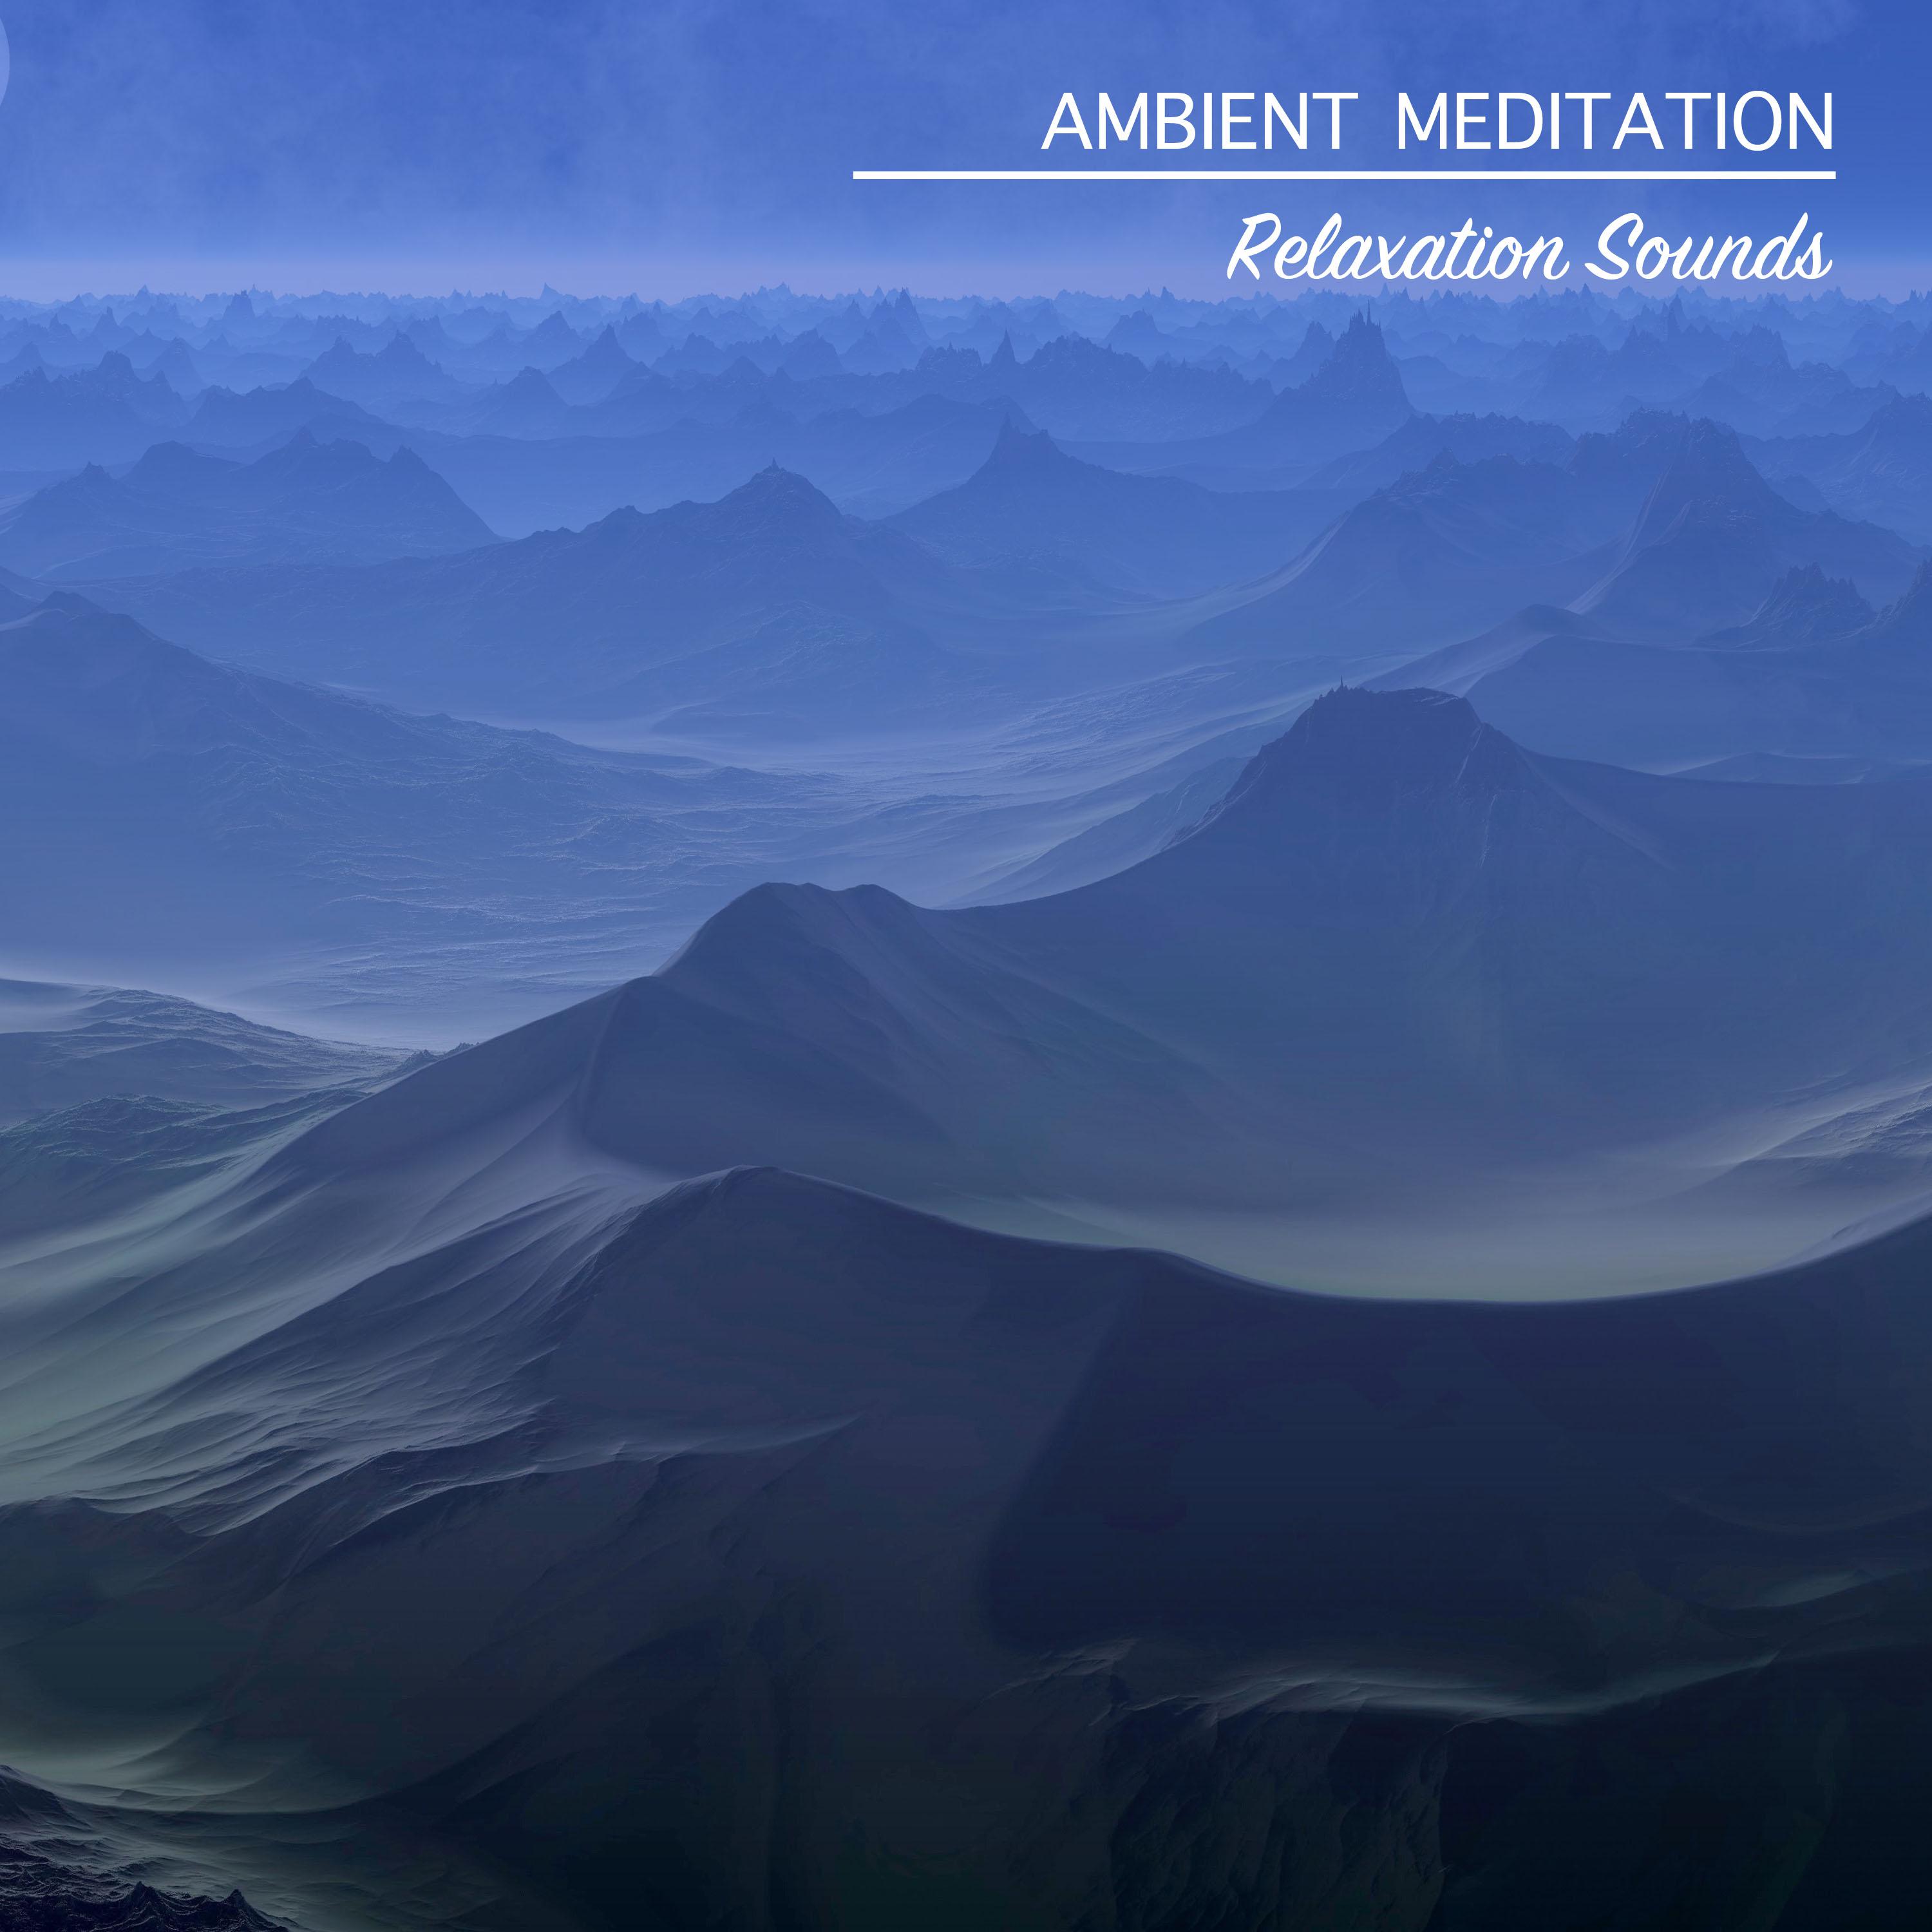 25 Ambient Meditation and Relaxation Sounds